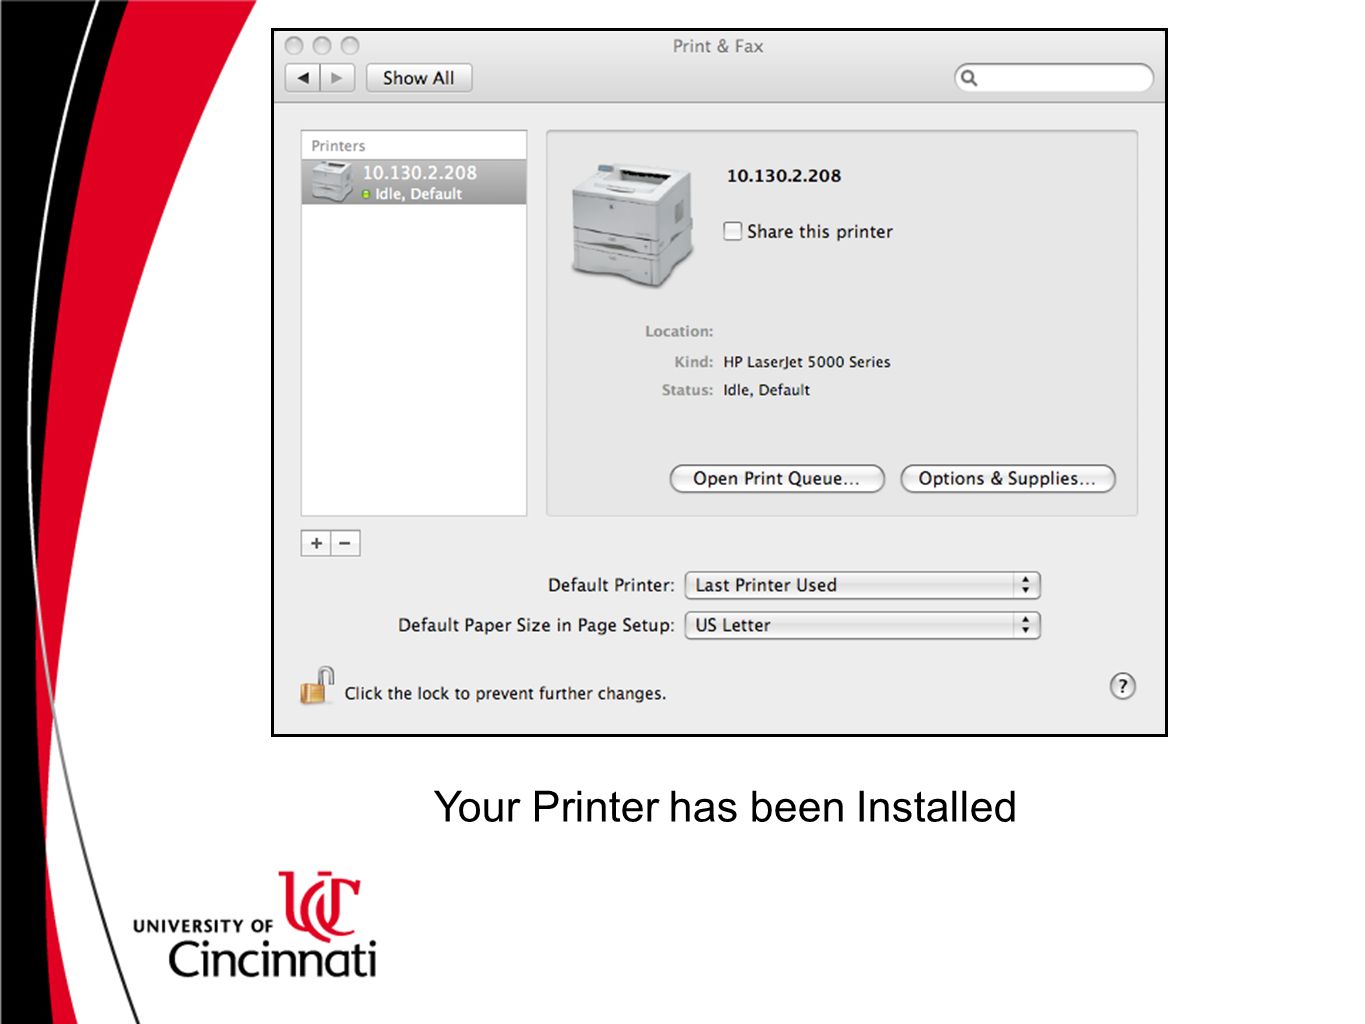 Your Printer has been Installed